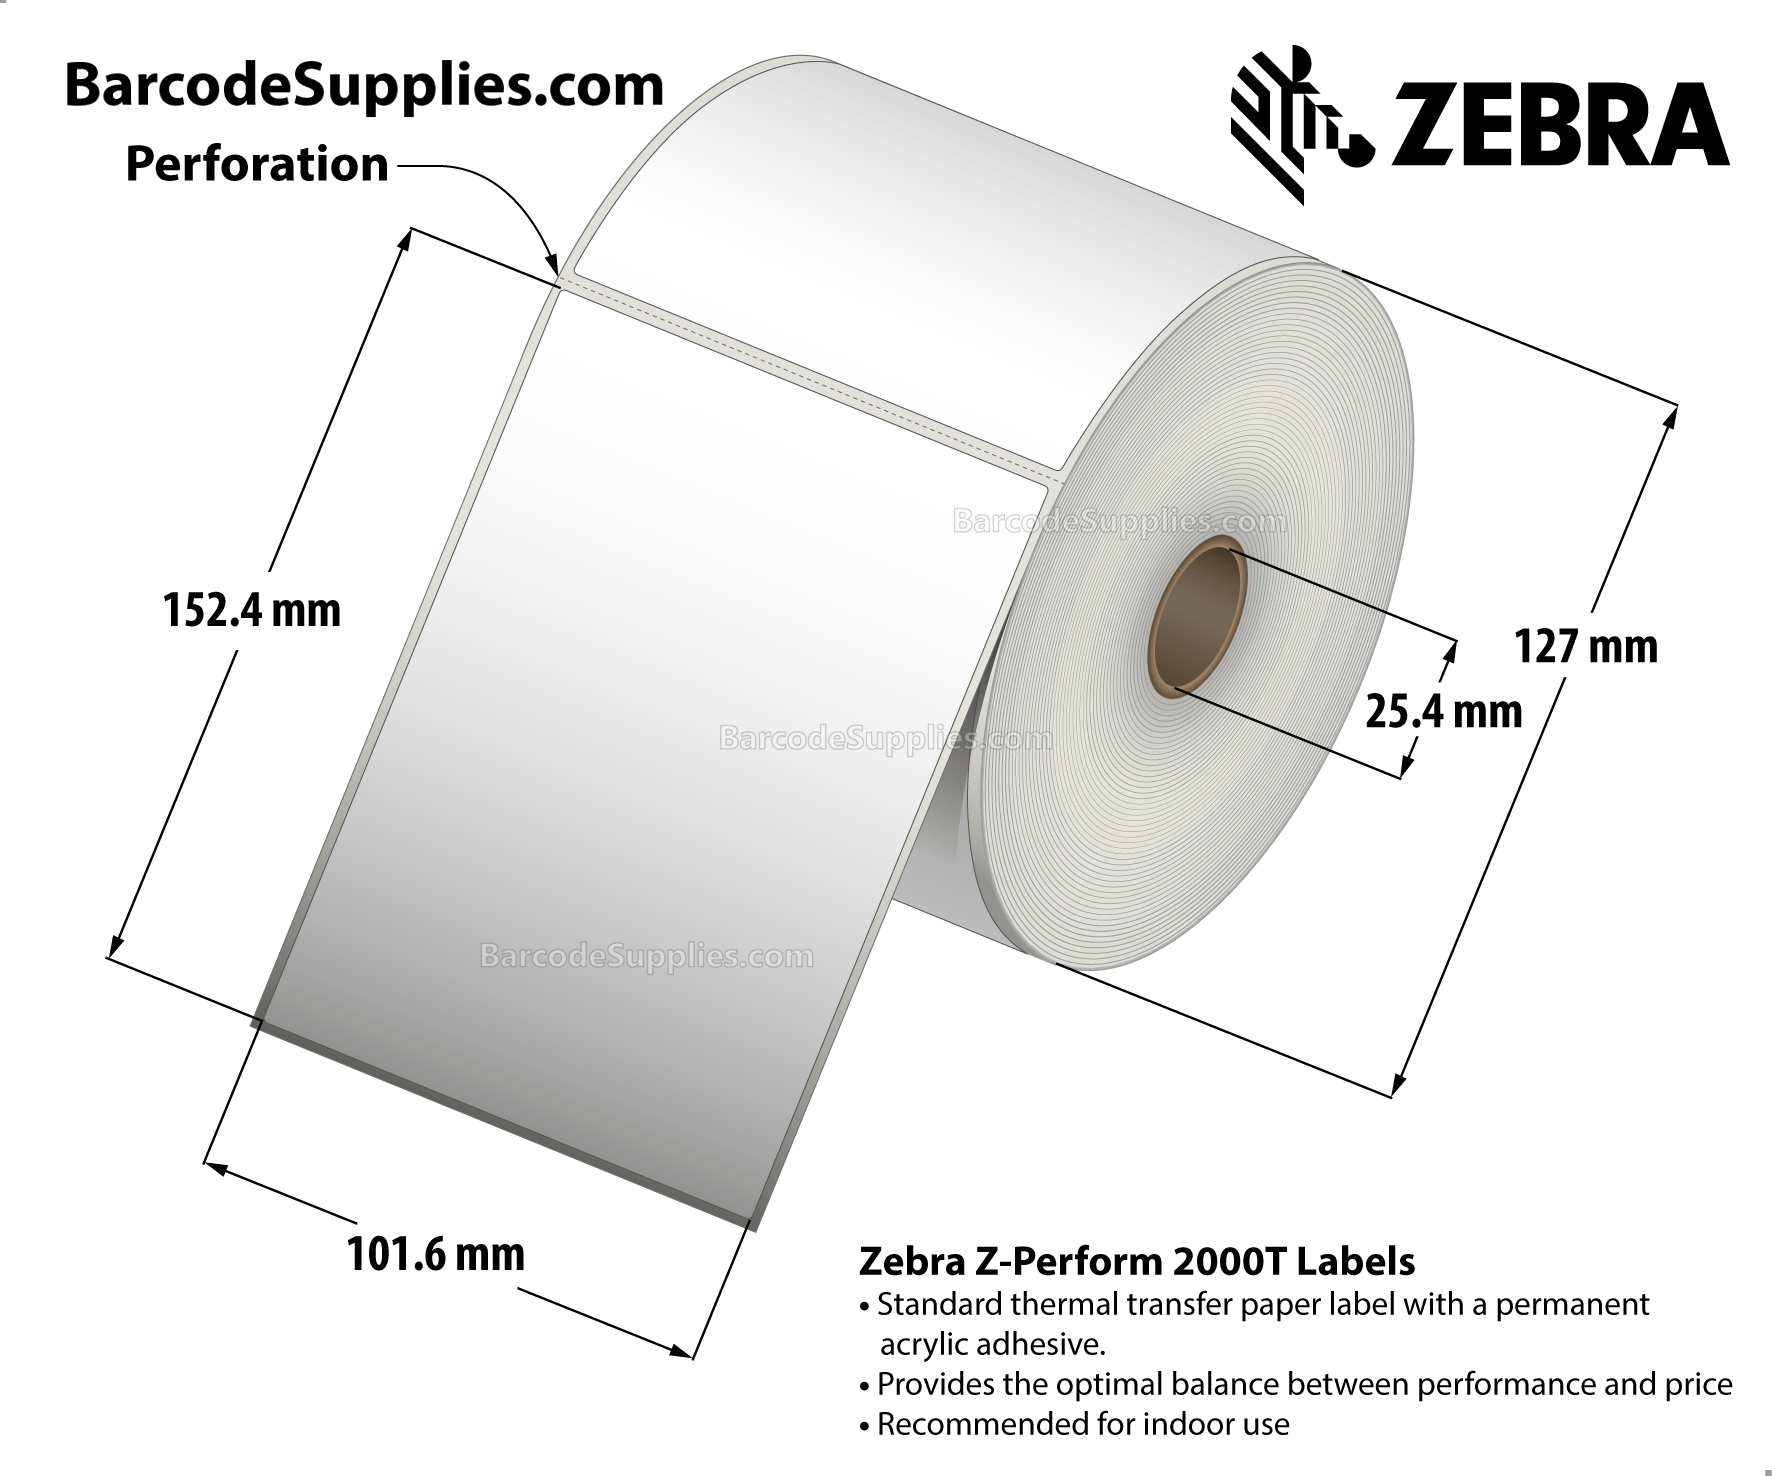 4 x 6 Thermal Transfer White Z-Perform 2000T Labels With Permanent Adhesive - Perforated - 460 Labels Per Roll - Carton Of 6 Rolls - 2760 Labels Total - MPN: 10005853